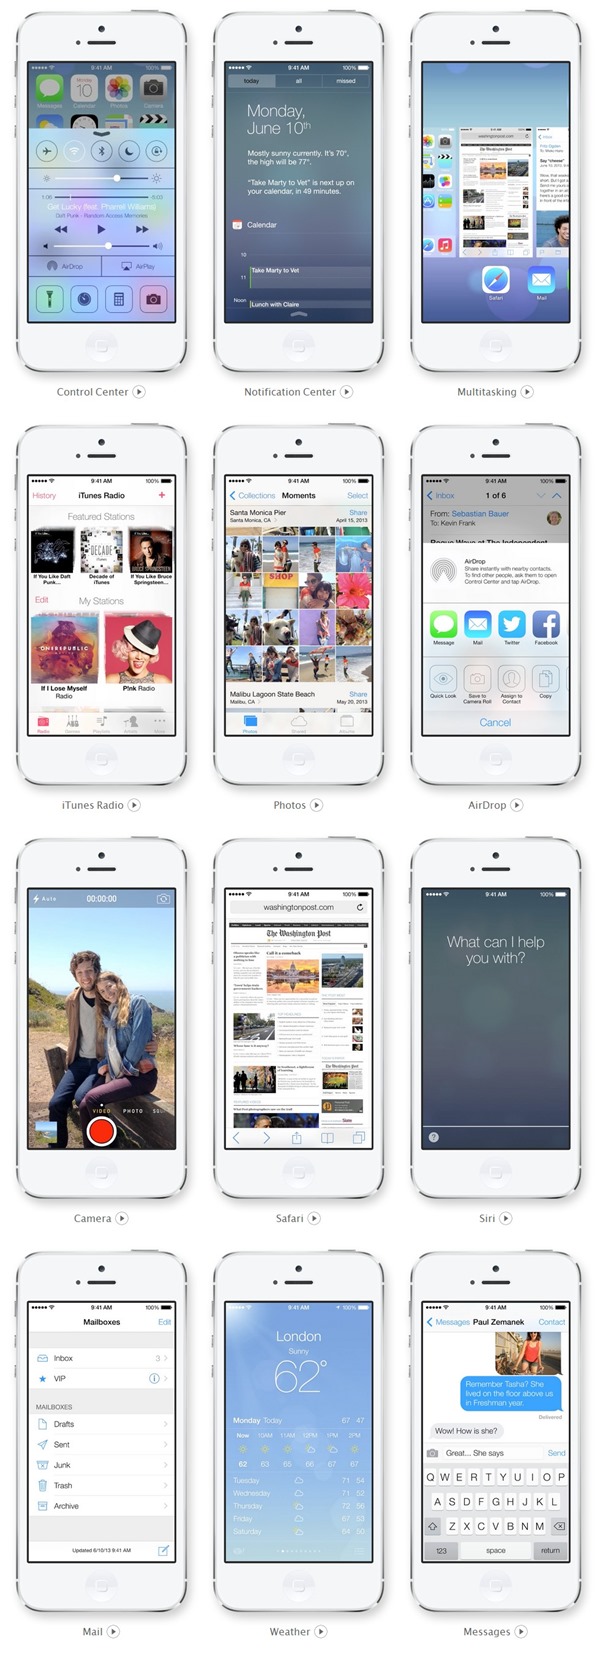 iOS 7 iOS 7 Turns Out to be an Incremental Upgrade but Nothing More